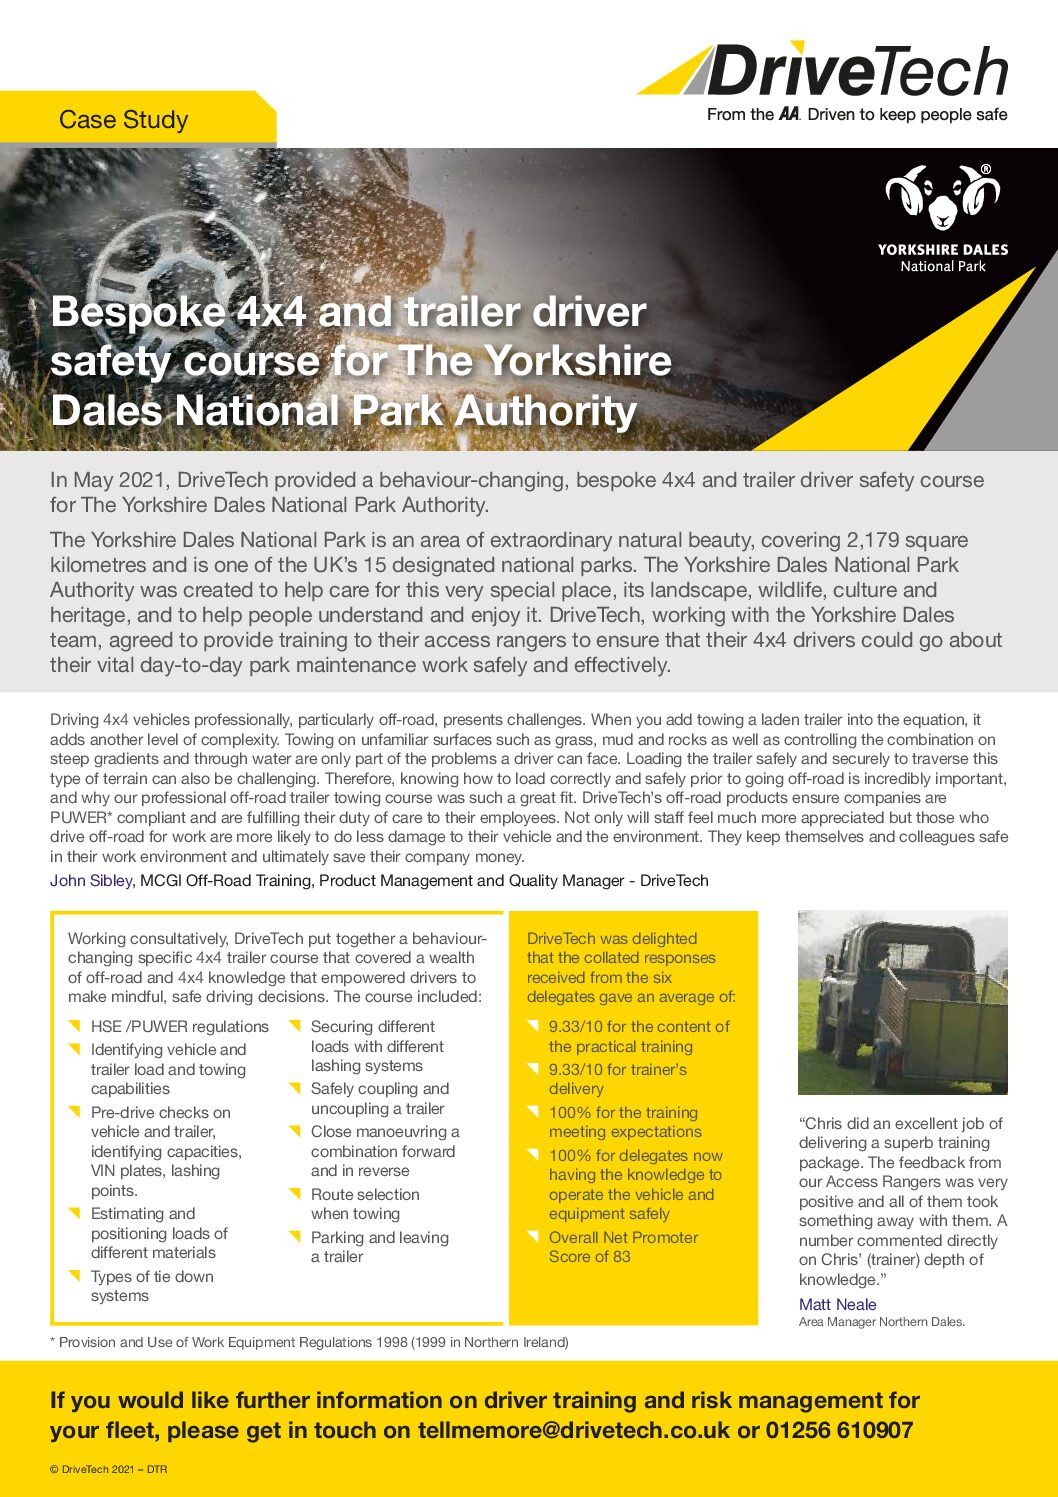 Bespoke 4×4 and trailer driver safety course for Yorkshire Dales National Park Authority